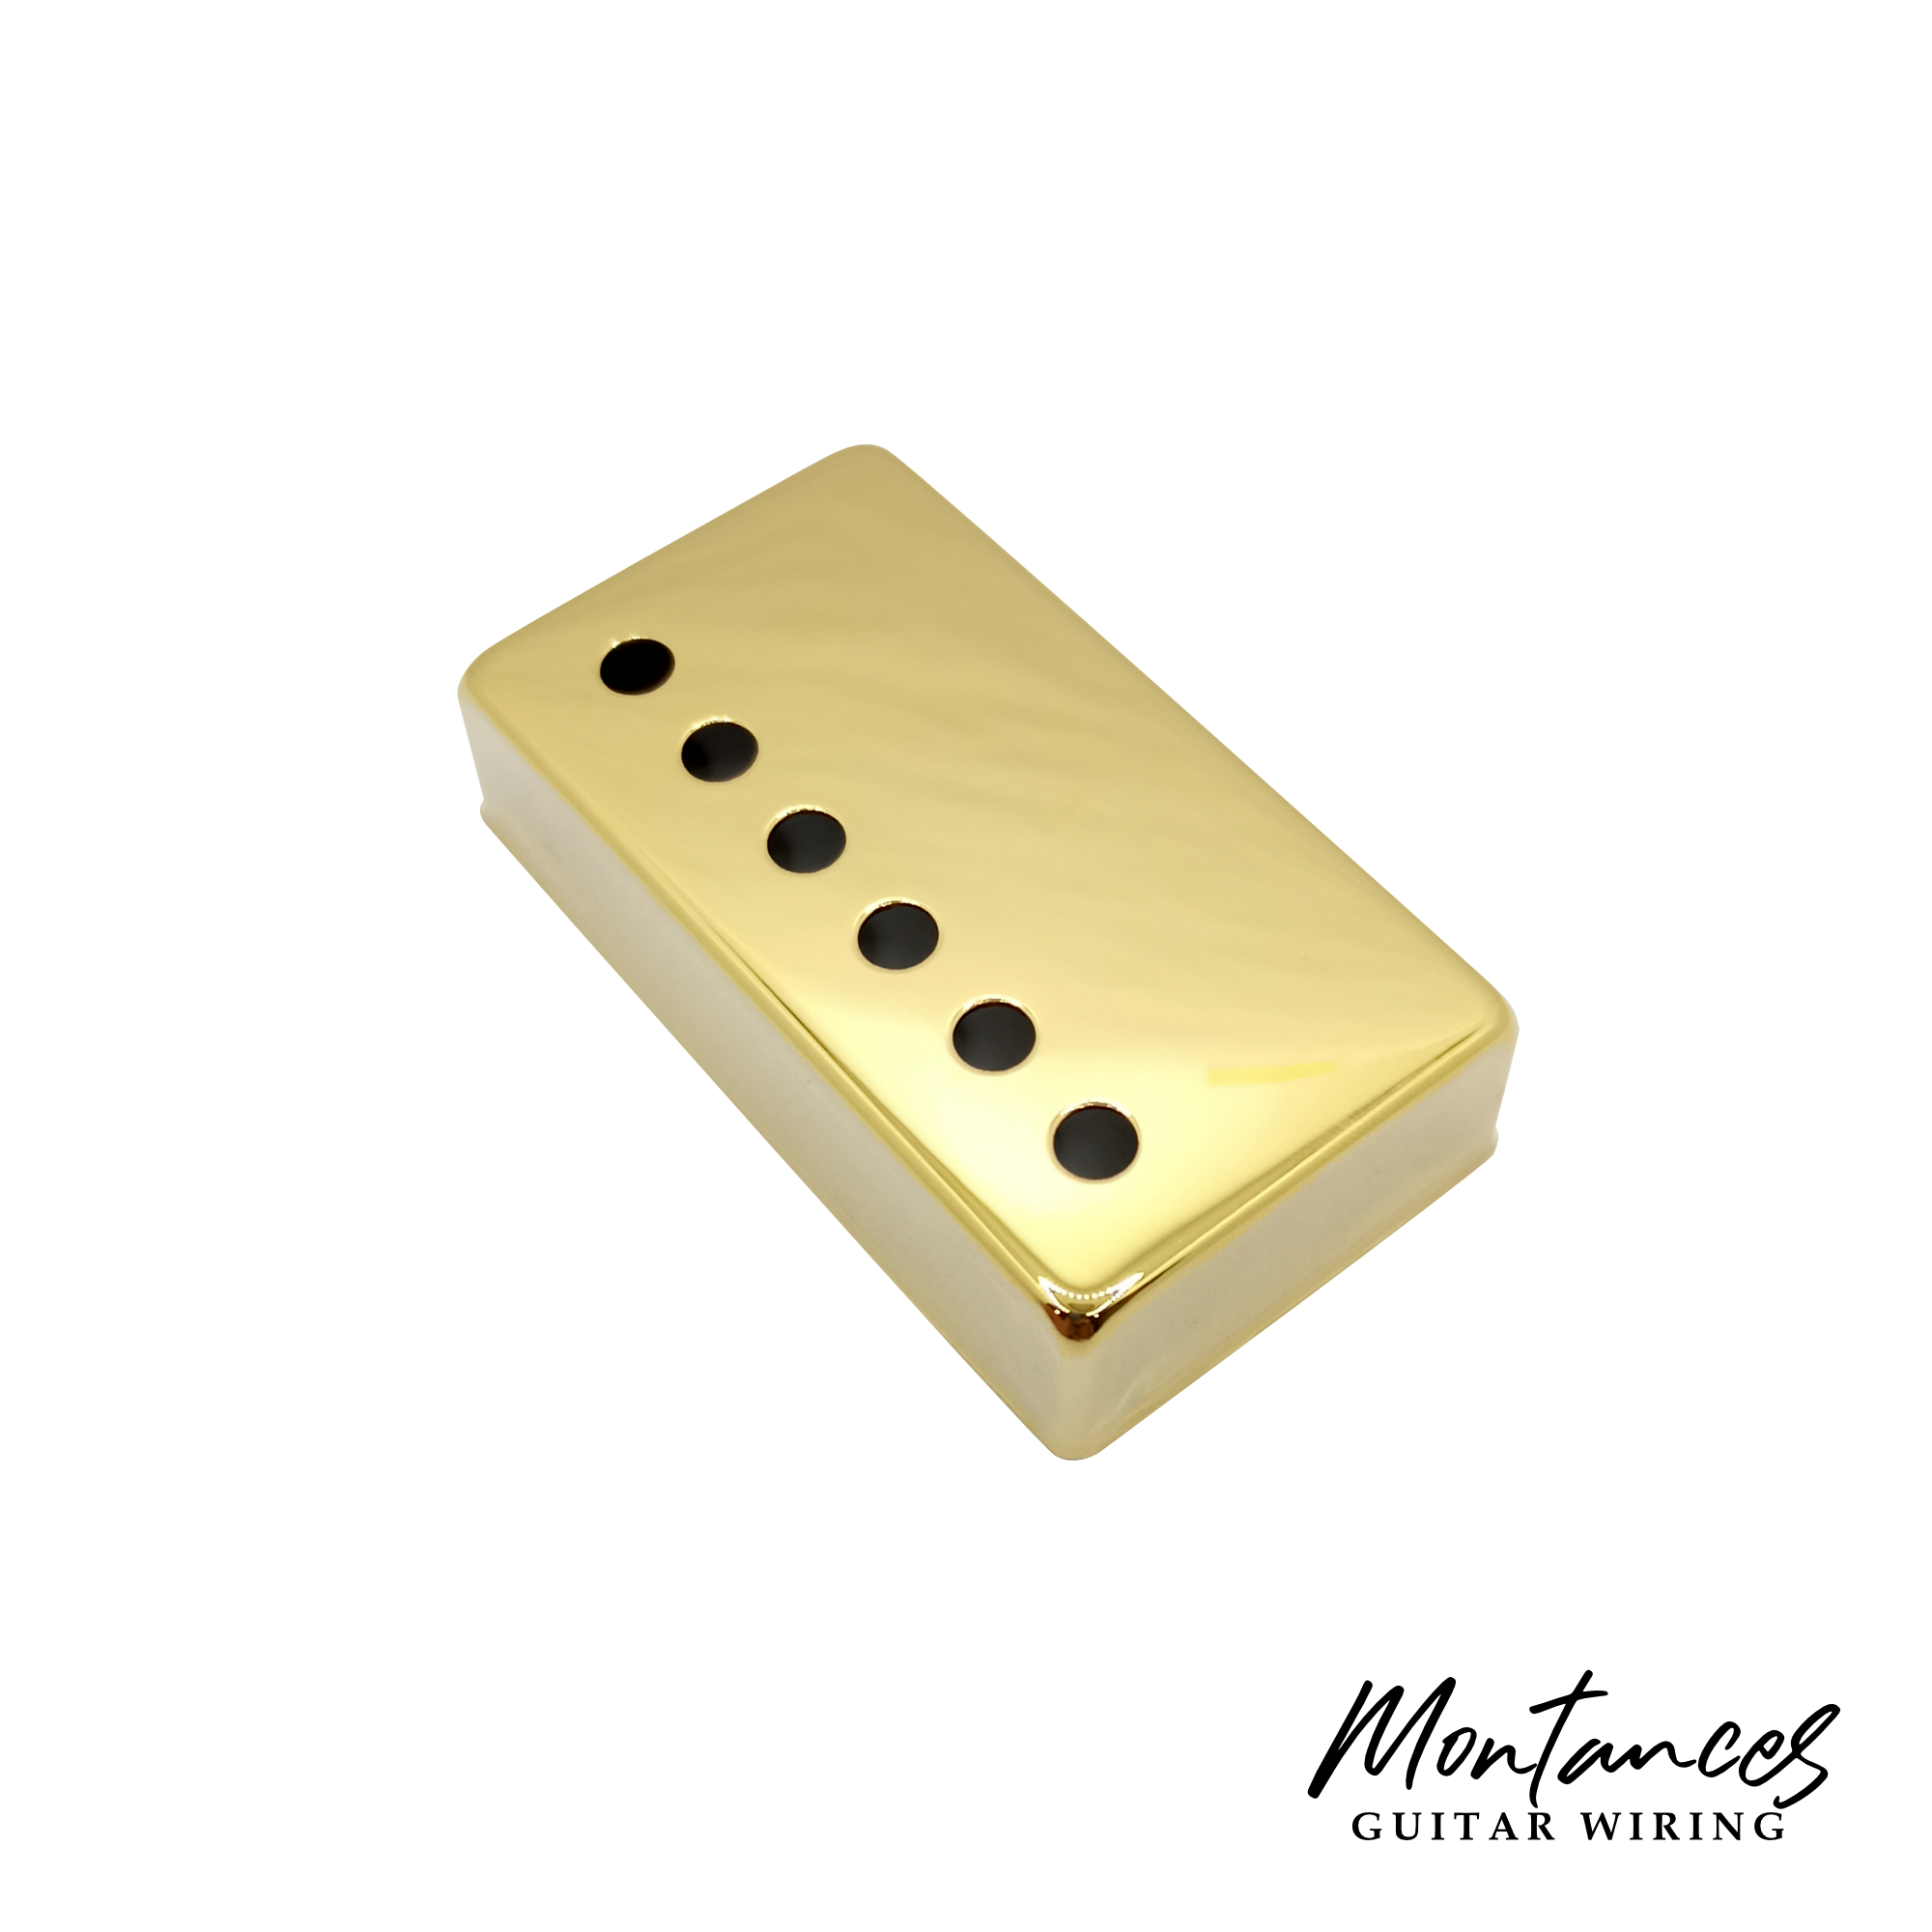 Humbucker Pickup Cover Nickel Silver Material 50mm and 52mm  (Made in Korea)